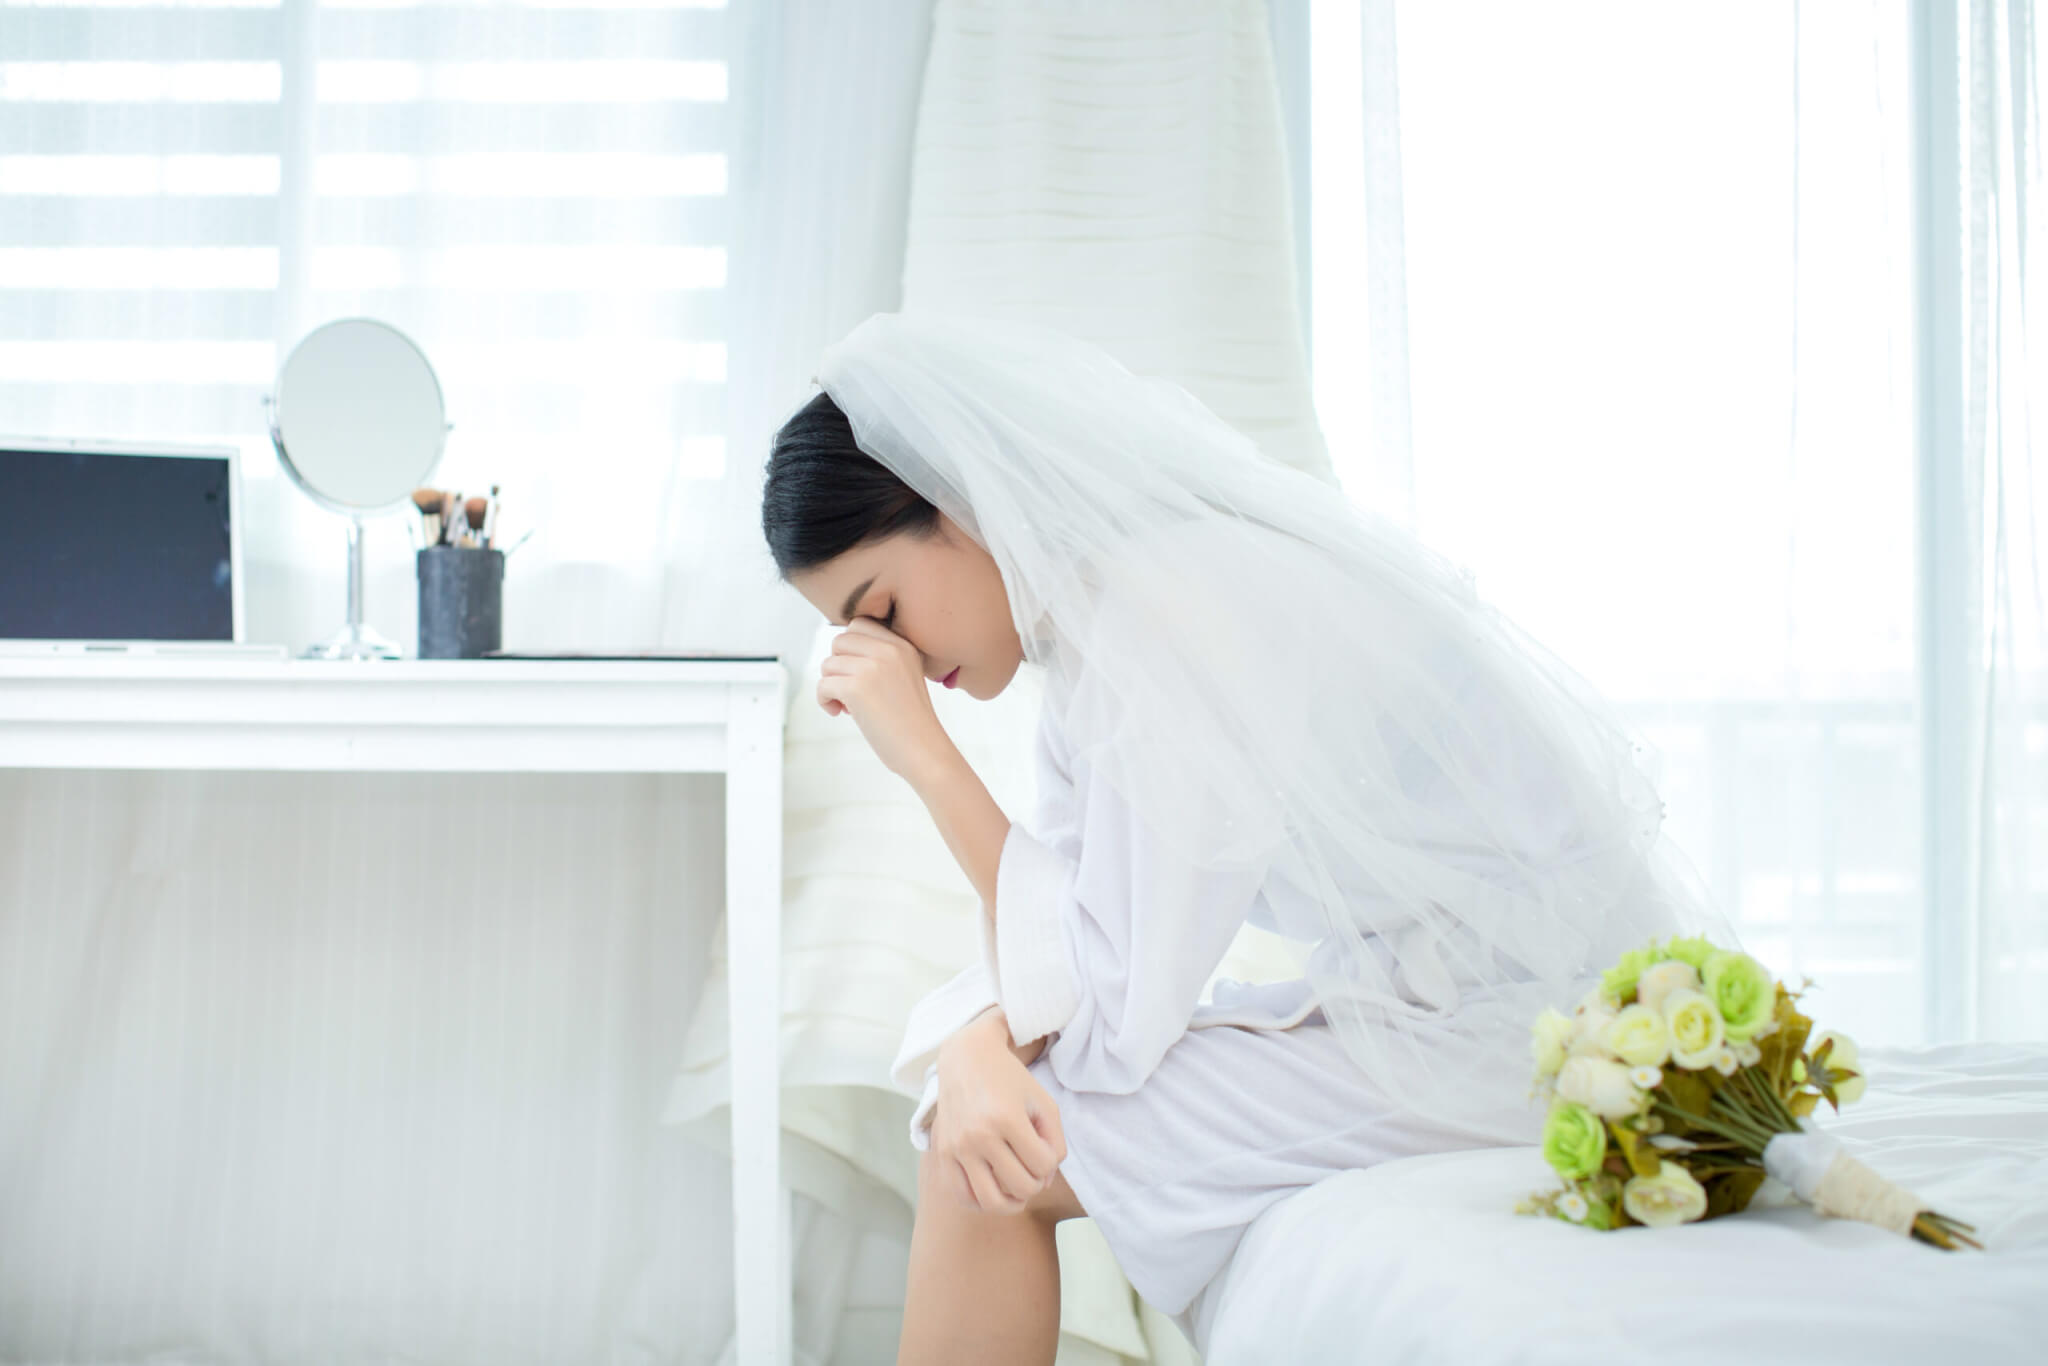 Help! I’m Supposed to Get My Period on My Wedding Day!